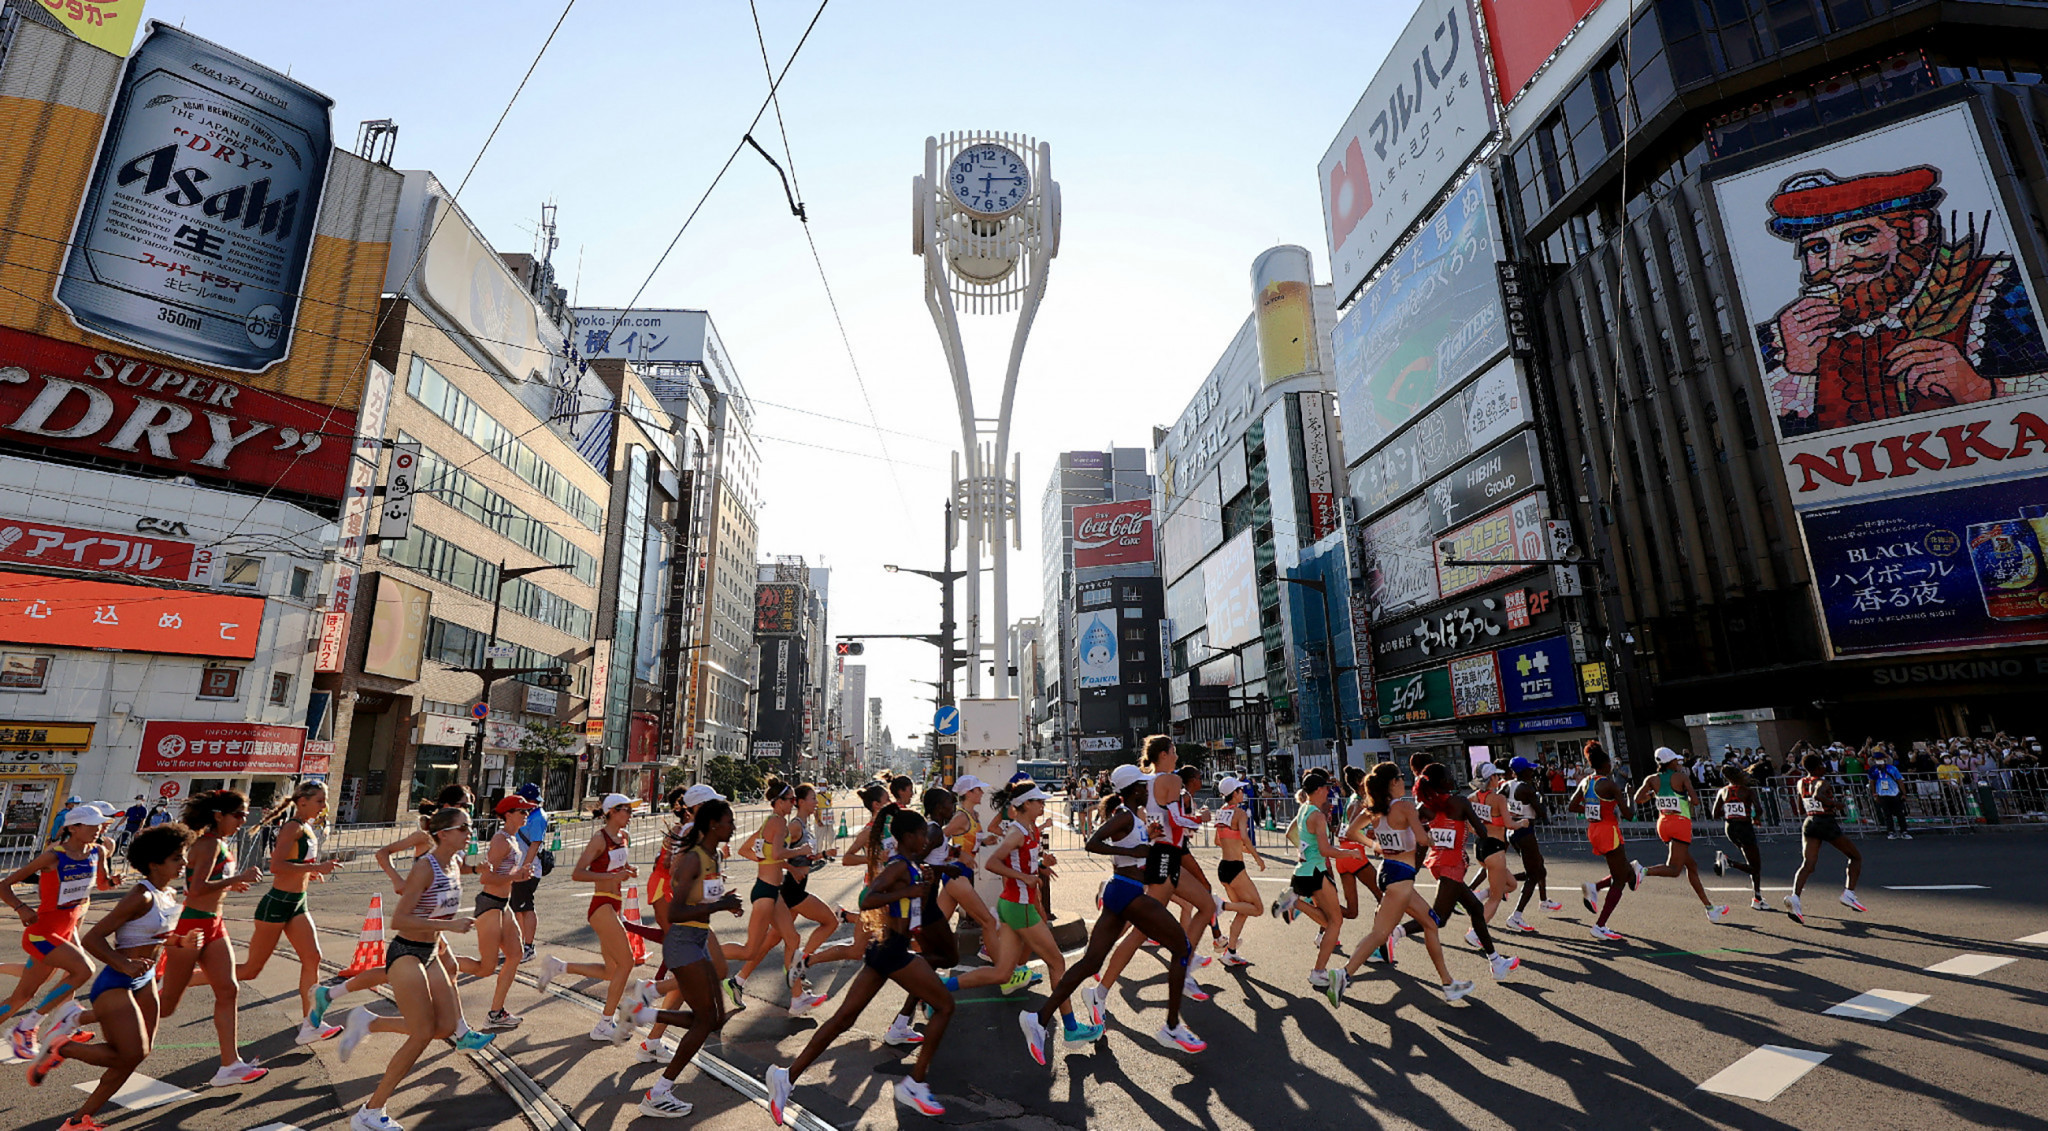 Road races at Tokyo 2020 were moved to Sapporo due to heat concerns, and Sebastian Coe admitted they may 